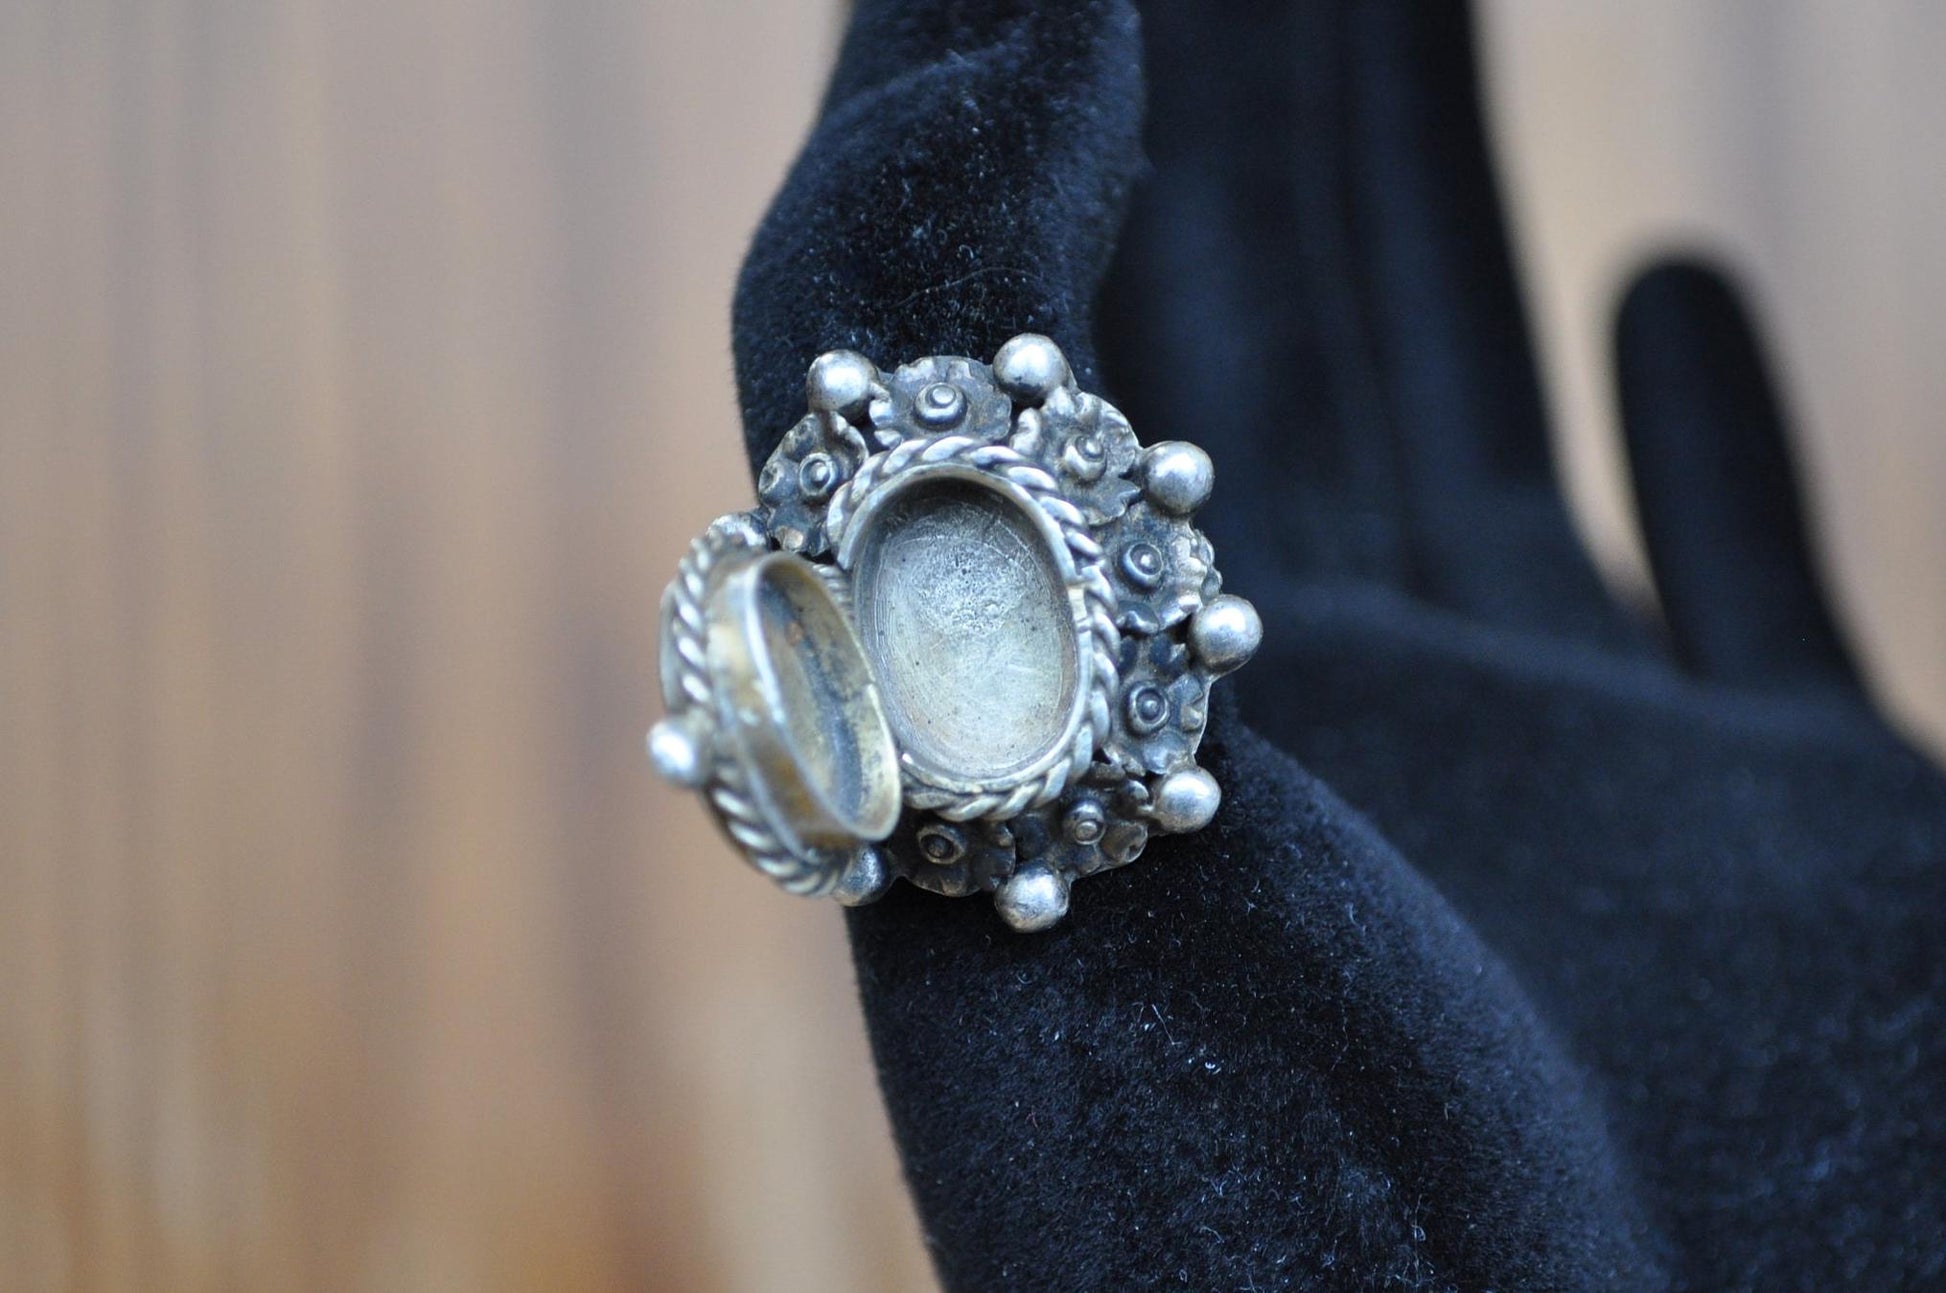 Vintage Poison Ring Sterling Silver Openable Secret Box, 925 Sterling Silver, Size 6.5 (Adjustable), Antique Silver Ring with Secret Opening